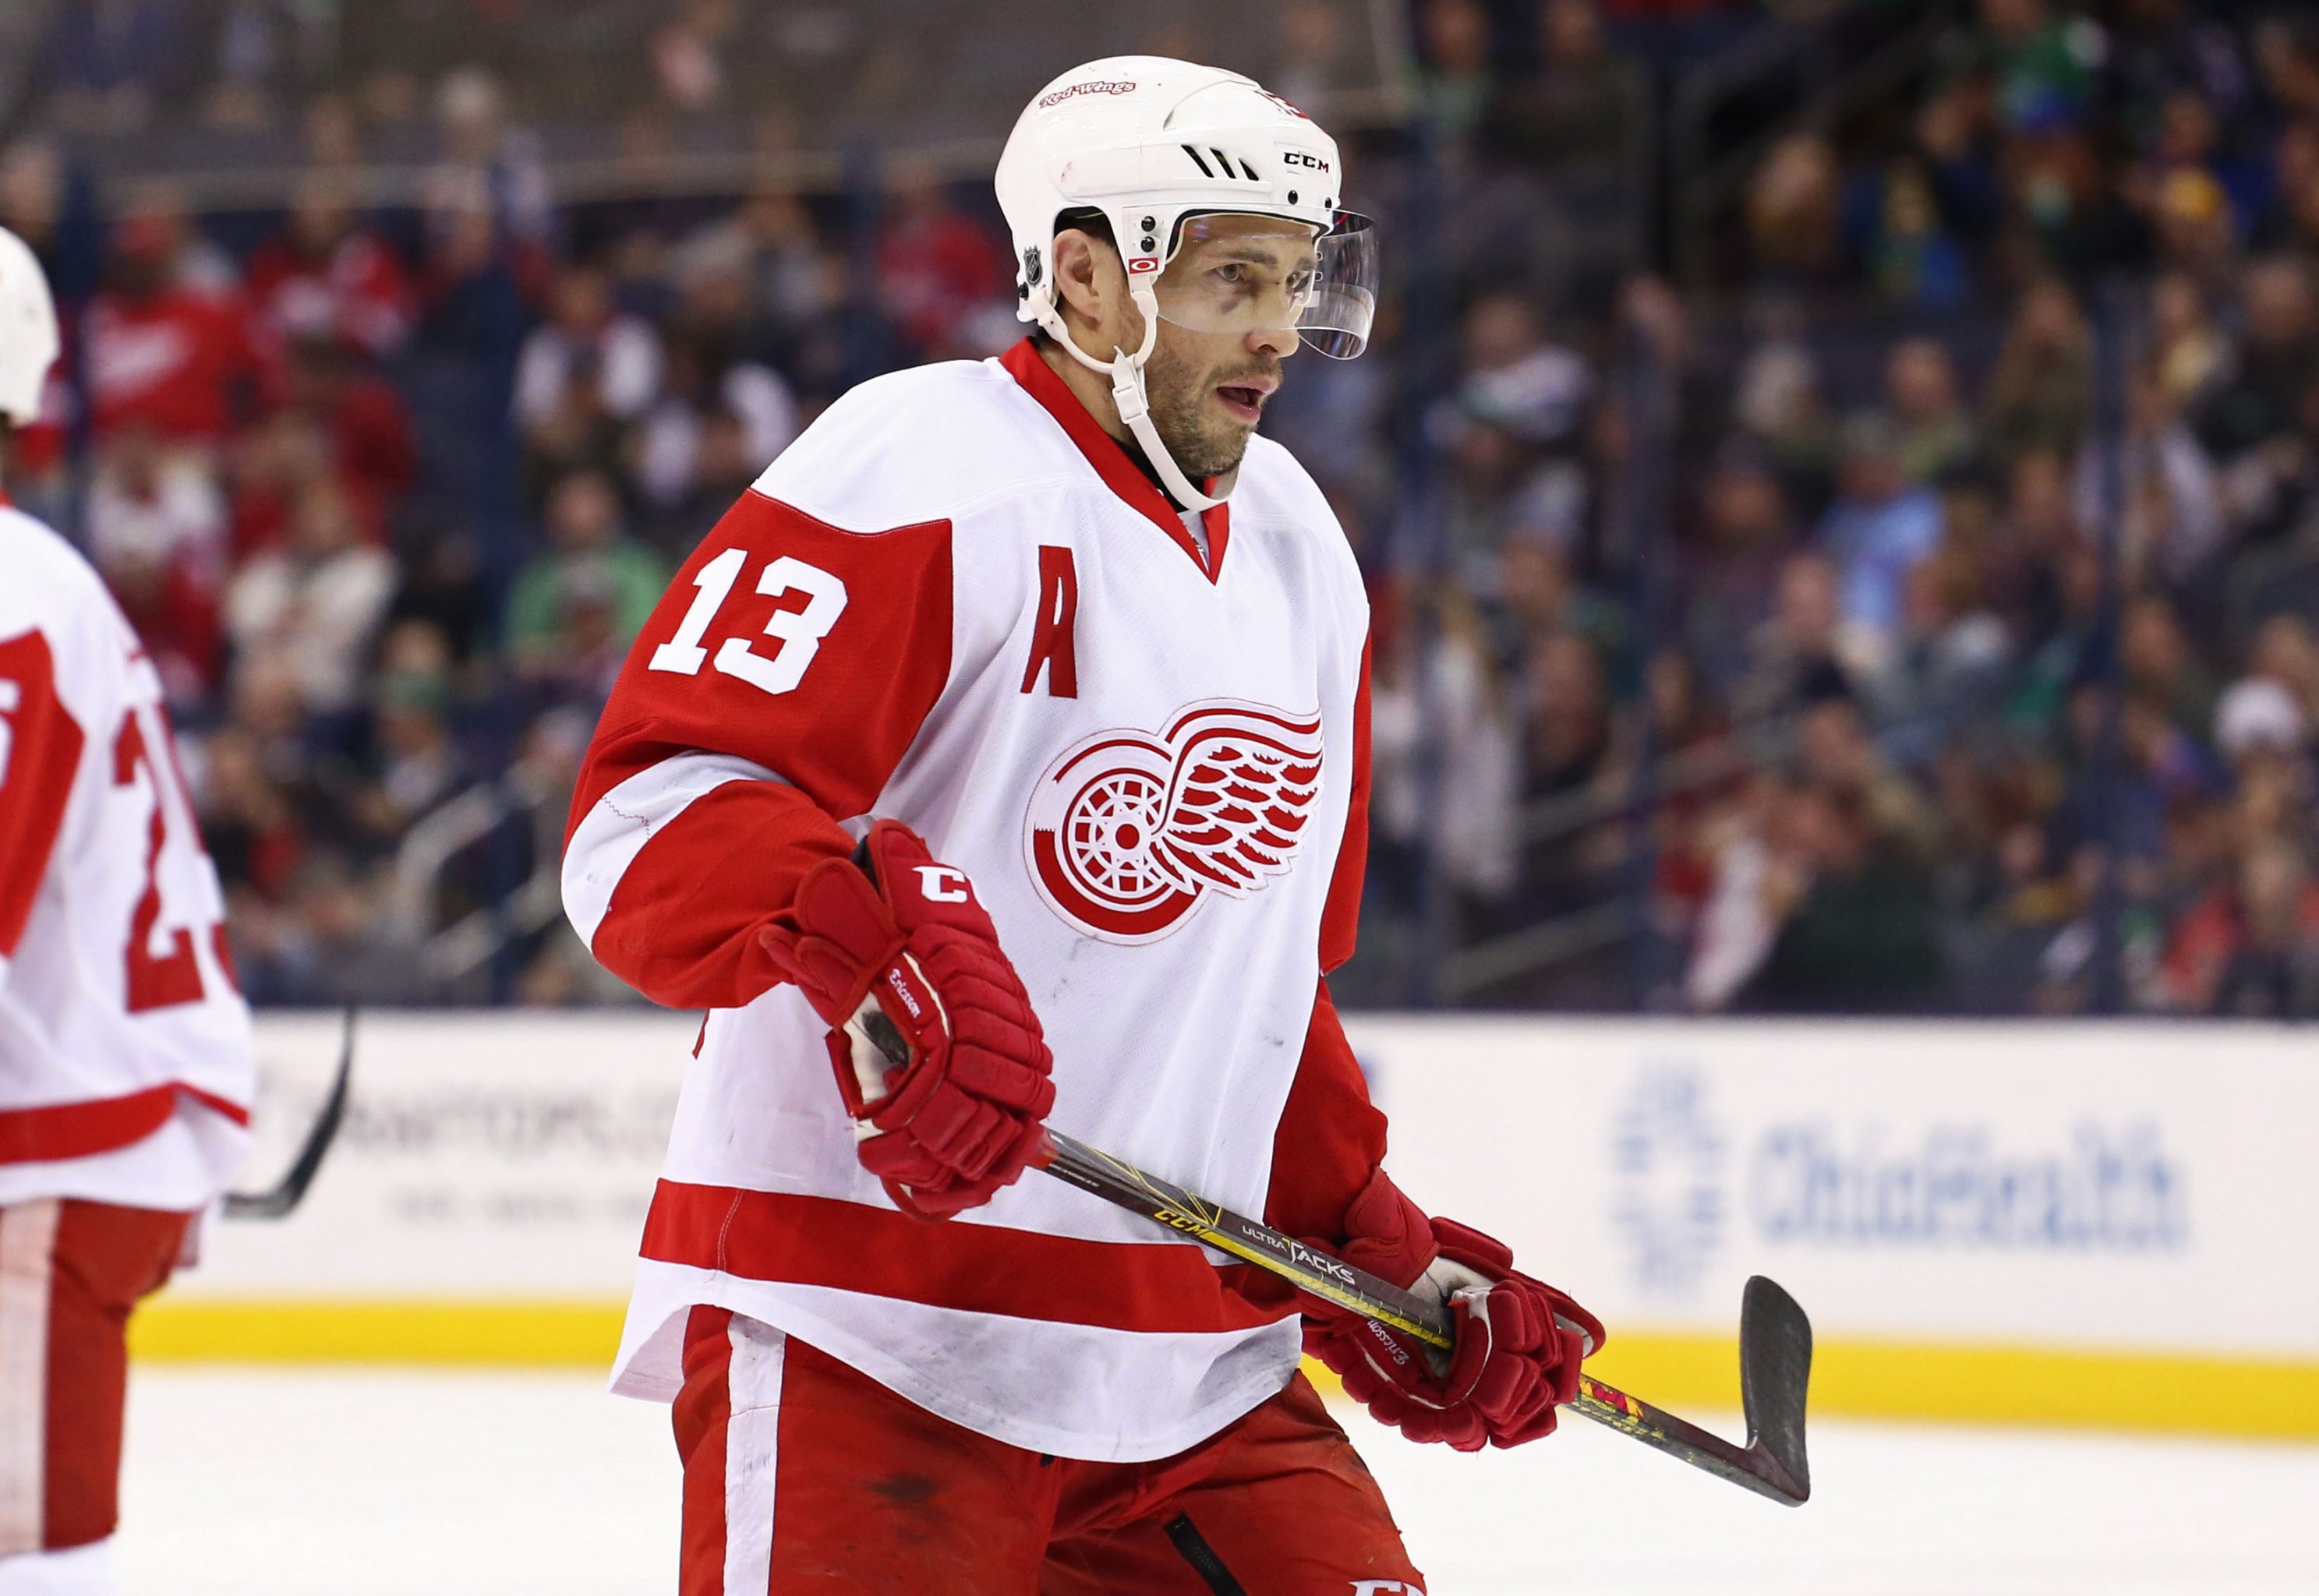 Former Red Wings Star Datsyuk Recalls Fight With Corey Perry